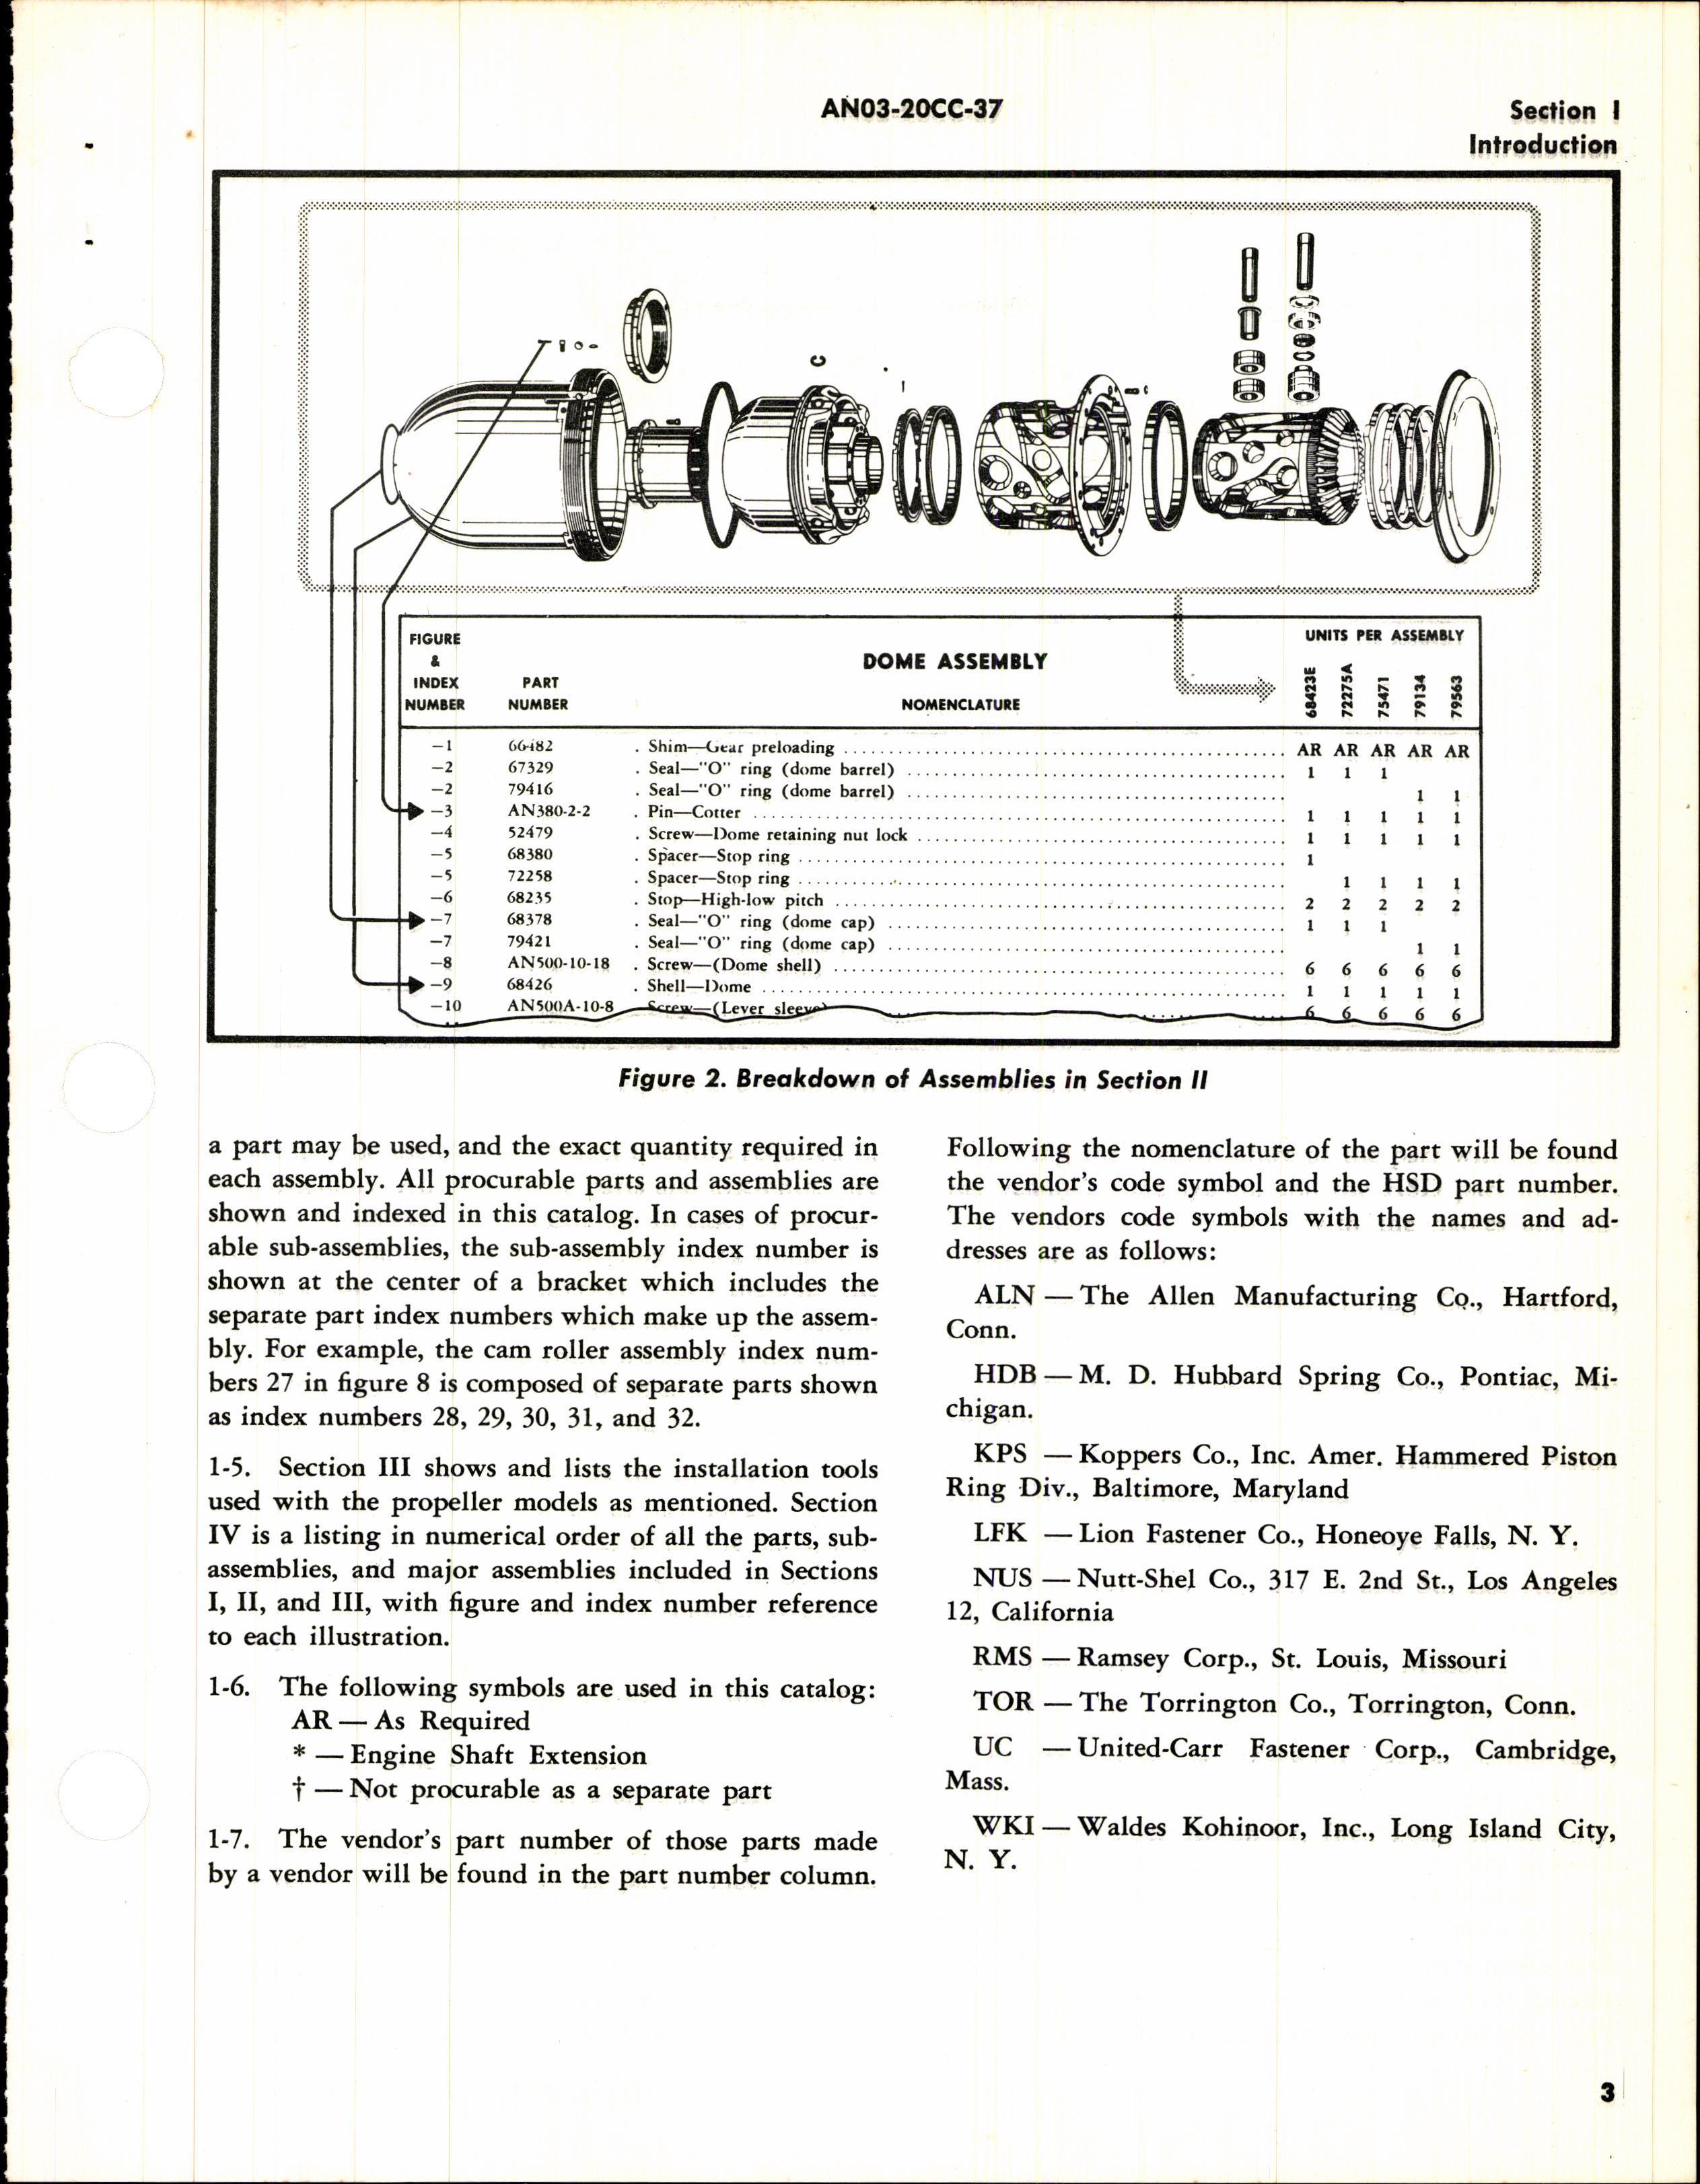 Sample page 7 from AirCorps Library document: Parts Catalog for Reversing Hydromatic Propeller Models 23260 and 24260